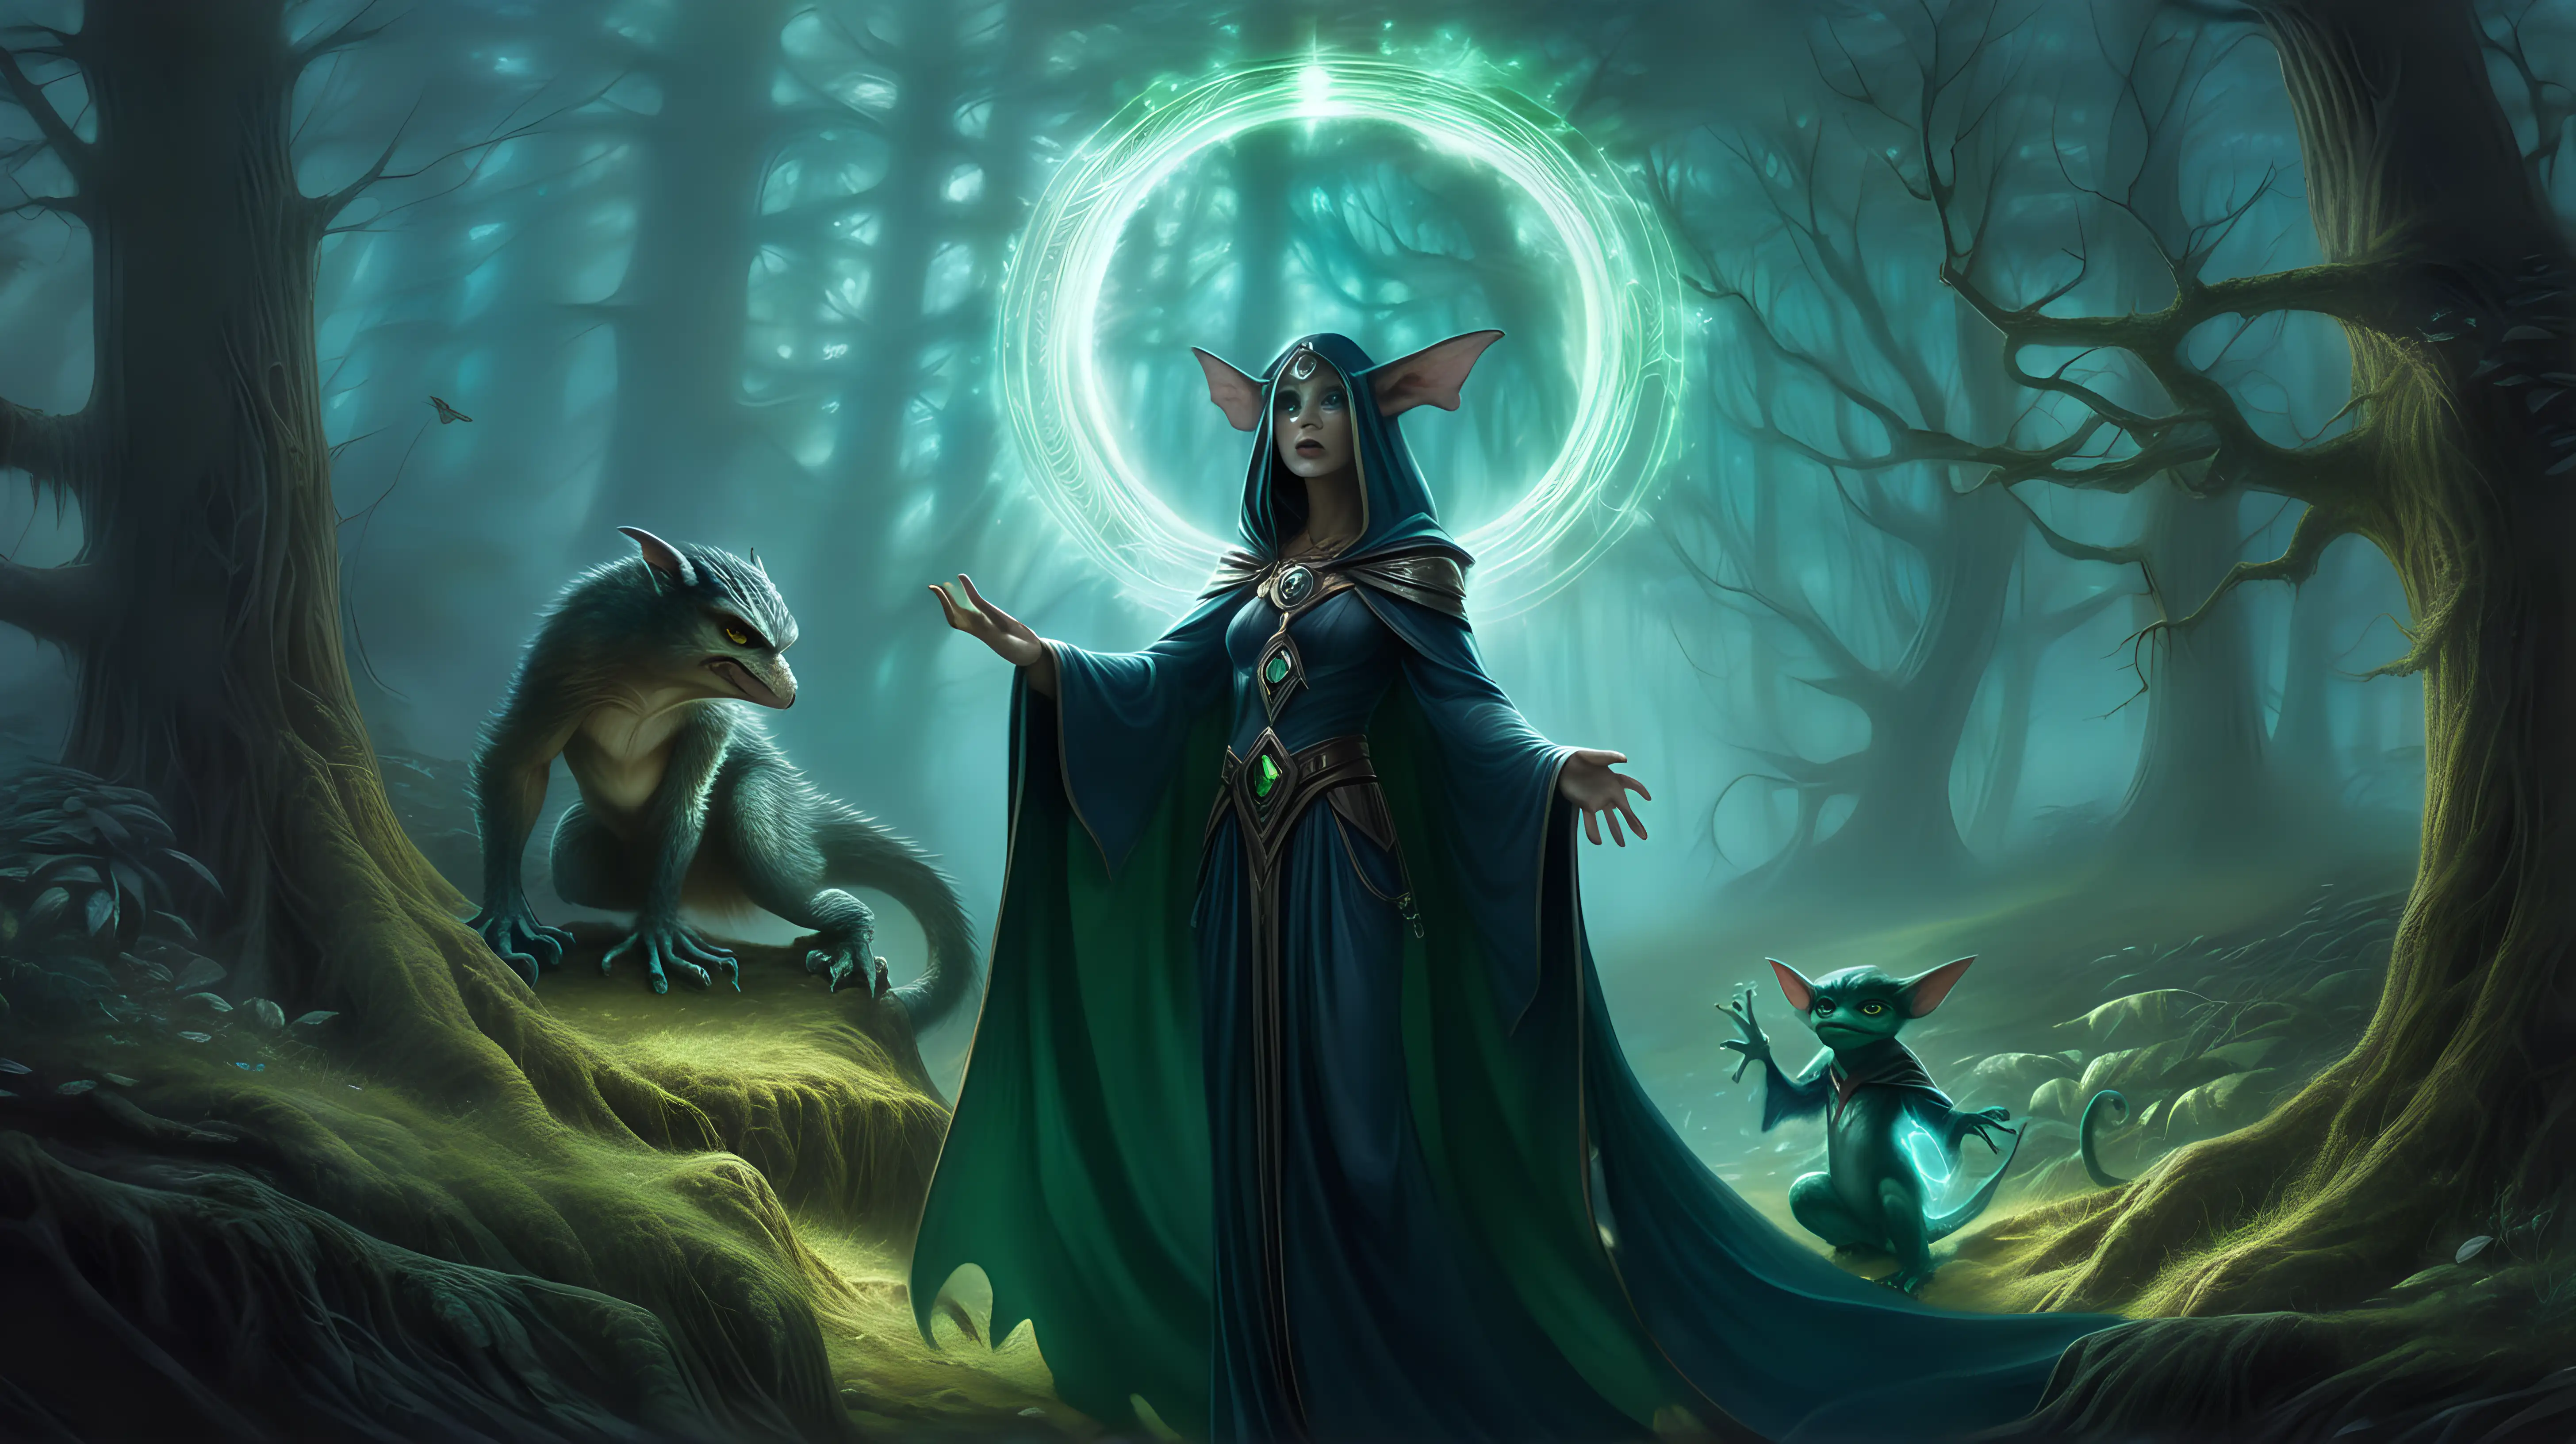 In a mystical forest, a sorceress with a glowing halo above her, seeks guidance from her ethereal familiar and malevolent gremlin companion, torn between using her powers for good or succumbing to darker temptations.